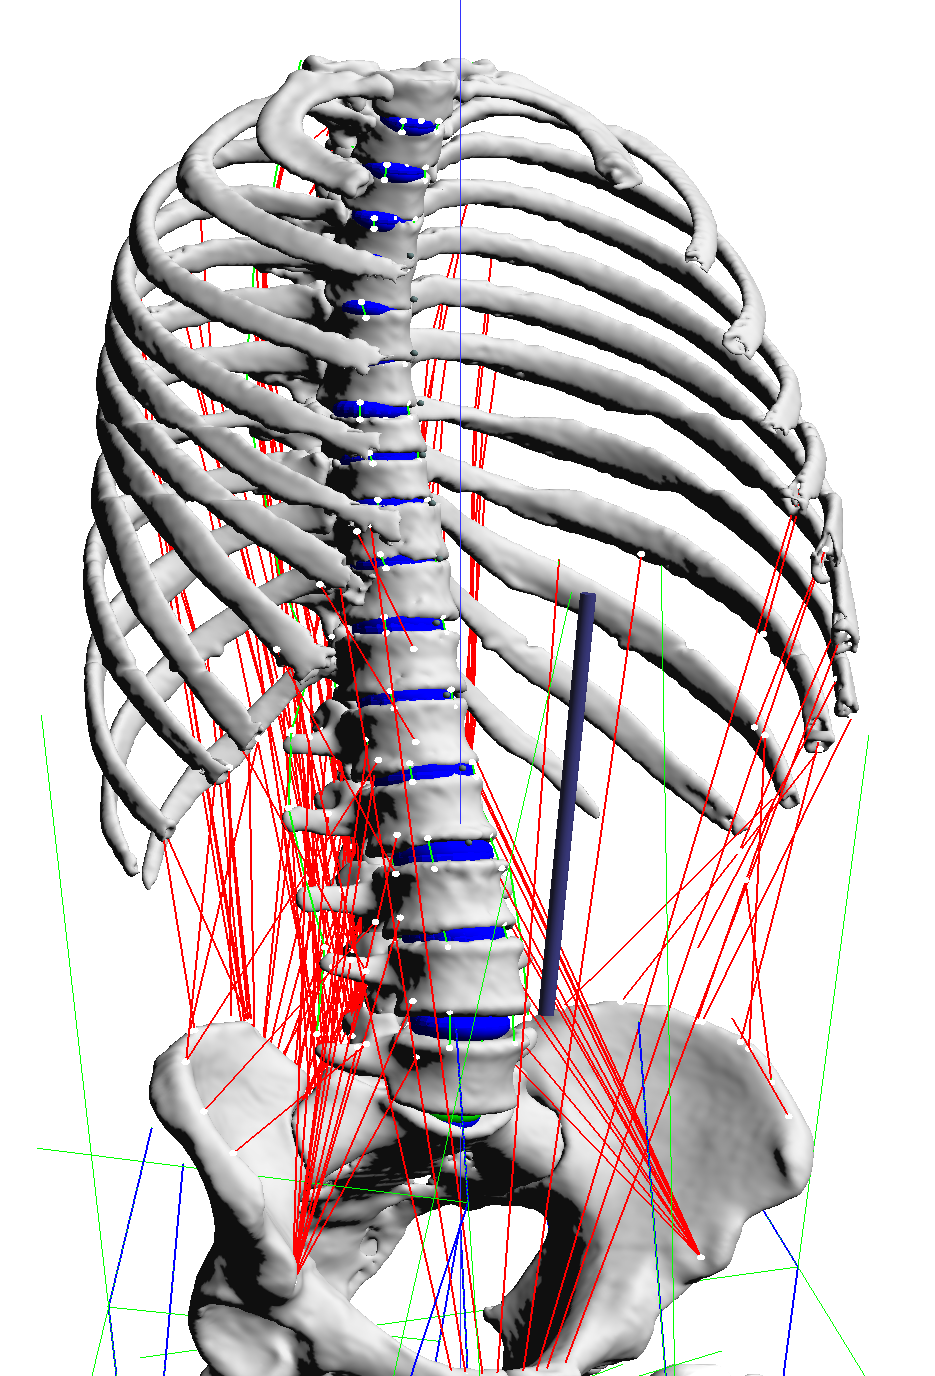 Modelling and simulation of the musculo-skeletal human system